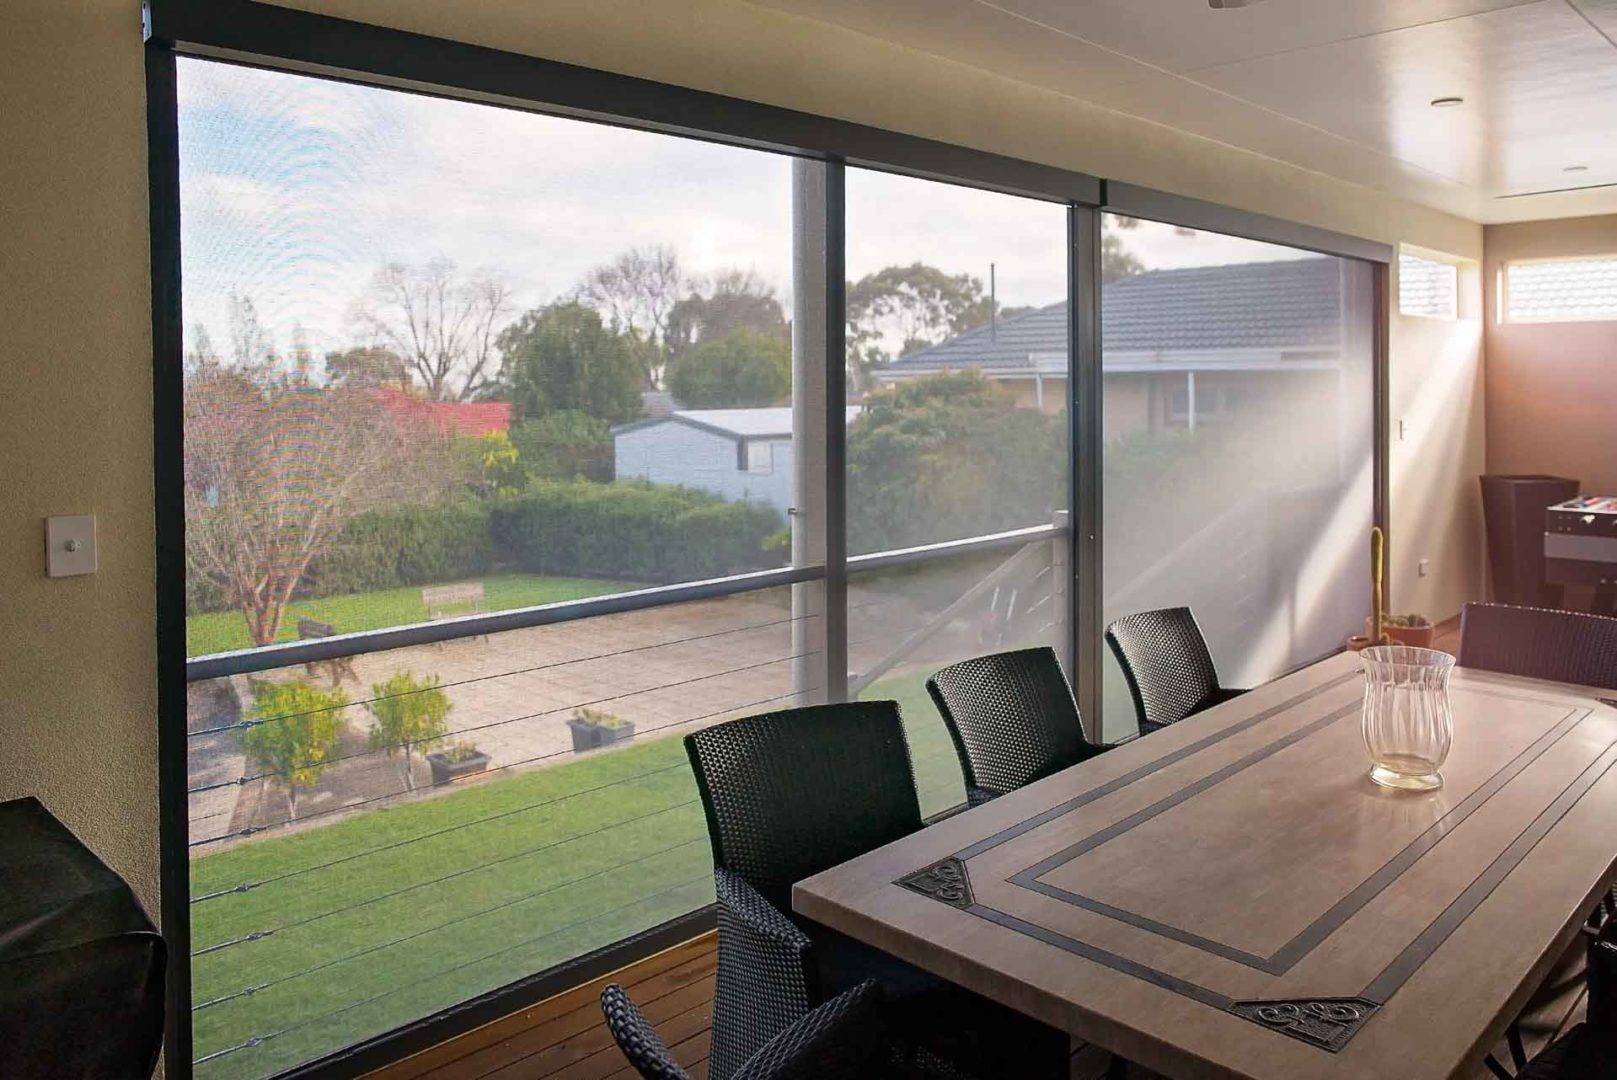 How you can entertain in comfort with outdoor balcony blinds - Shade outdoor balcony blinds, Australian Outdoor Living.